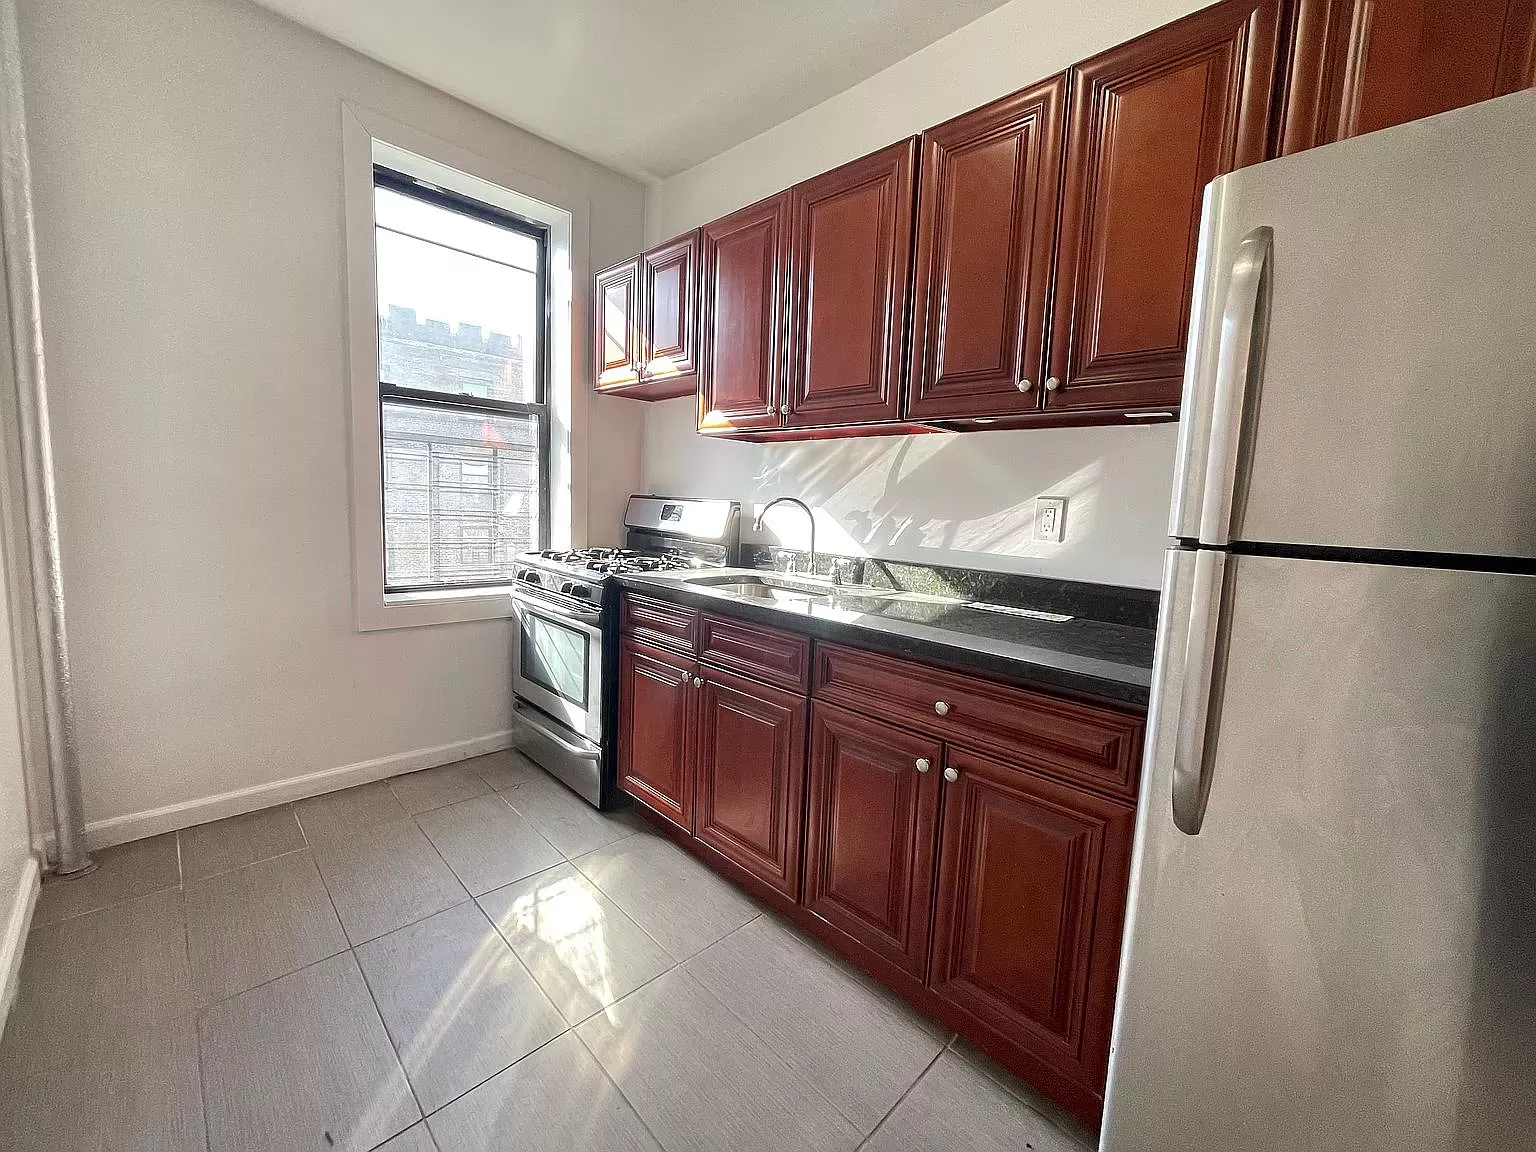 Apartment for Rent in SunnySide Queens NY